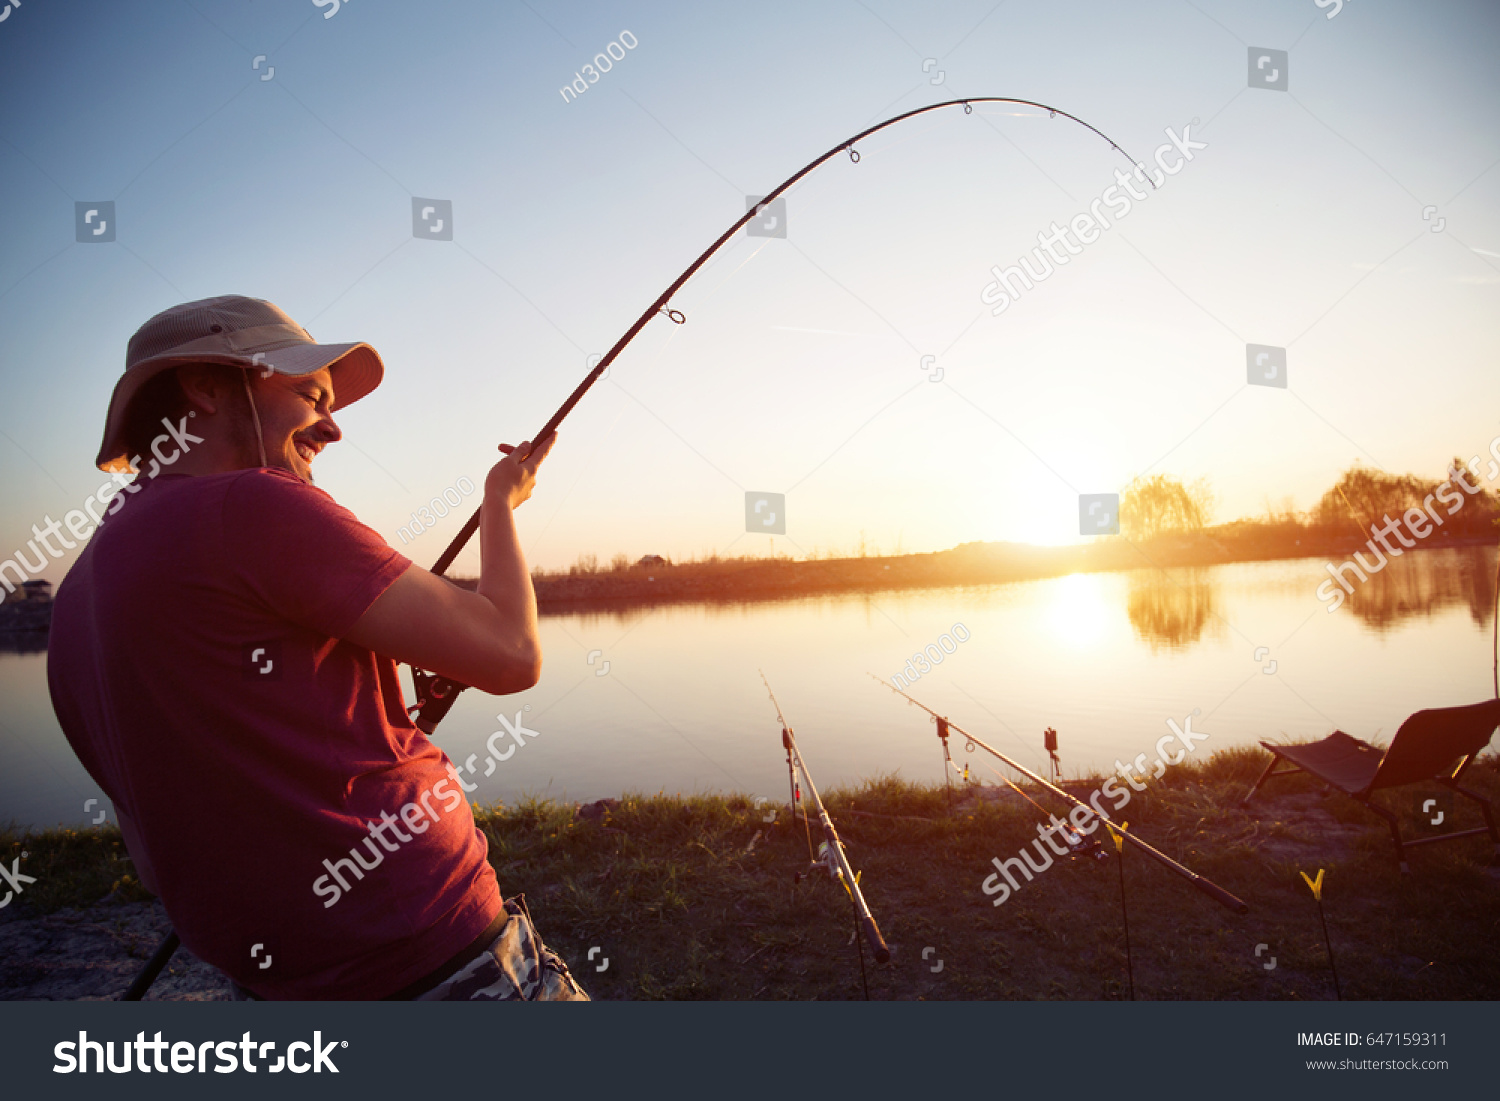 Fishing as recreation and sports displayed by fisherman at lake #647159311